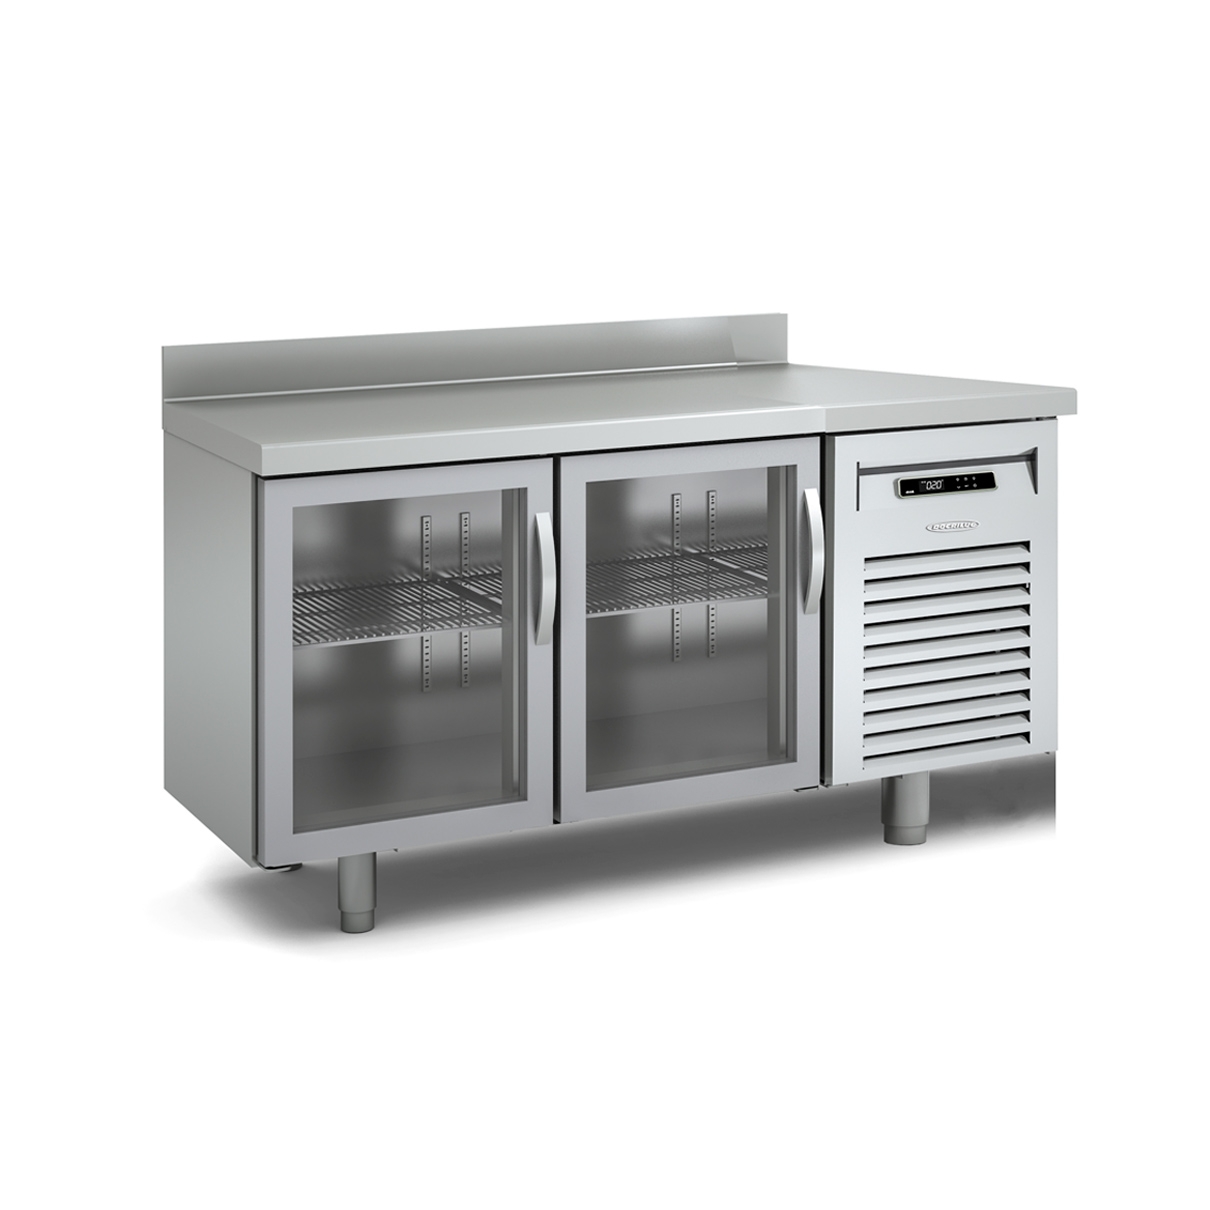 Gastronorm 1/1 Refrigerated Table BRG-V